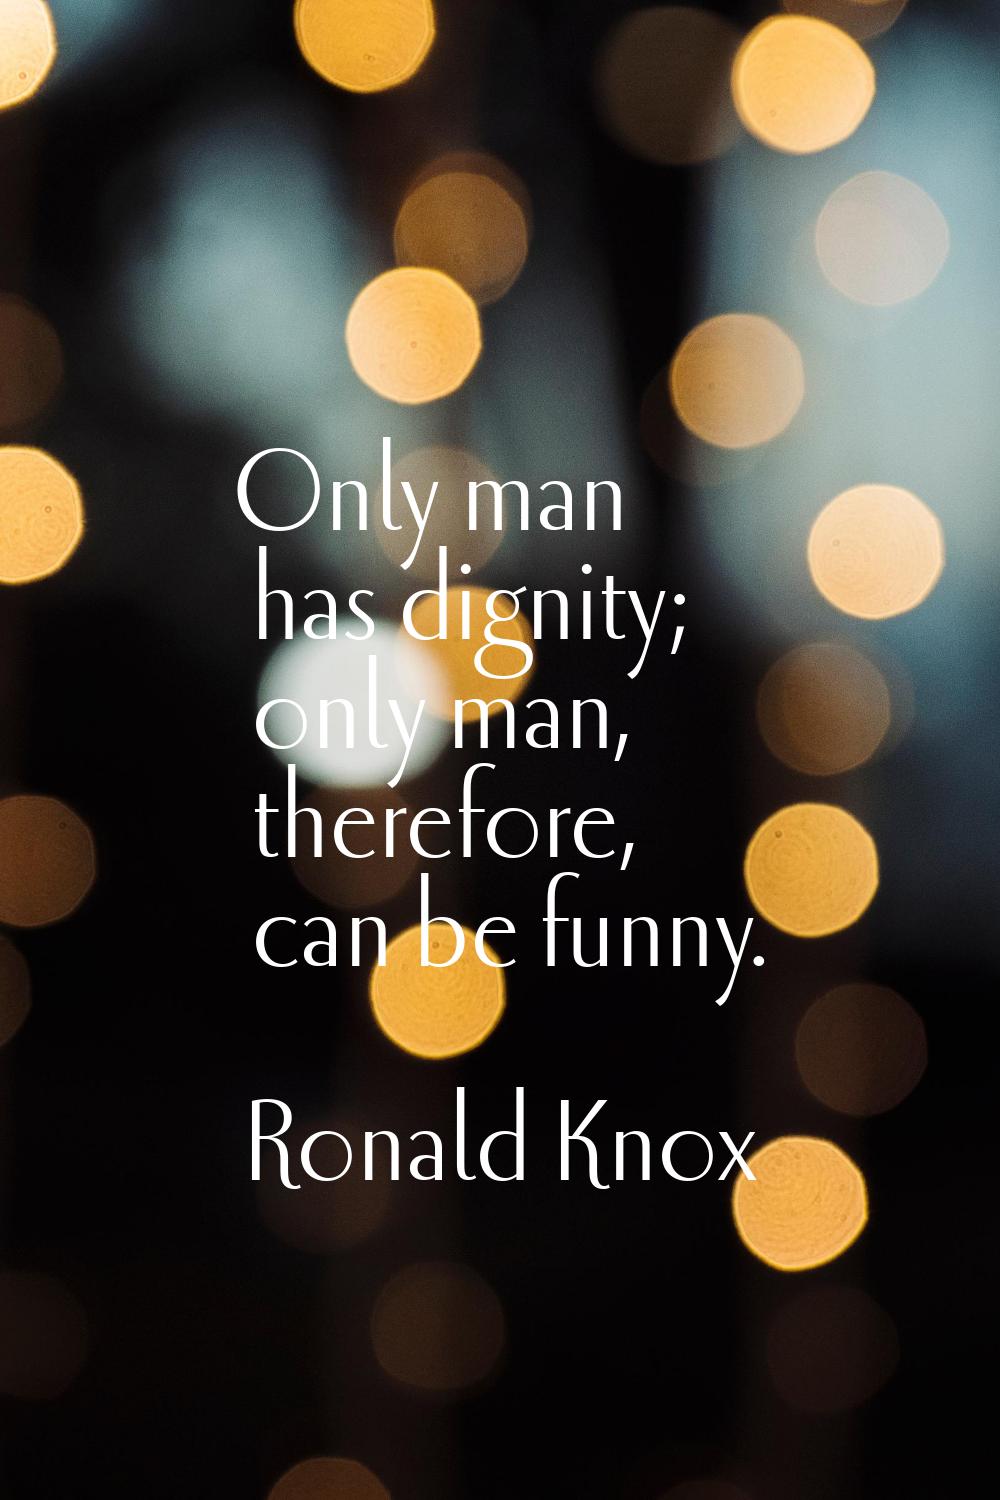 Only man has dignity; only man, therefore, can be funny.